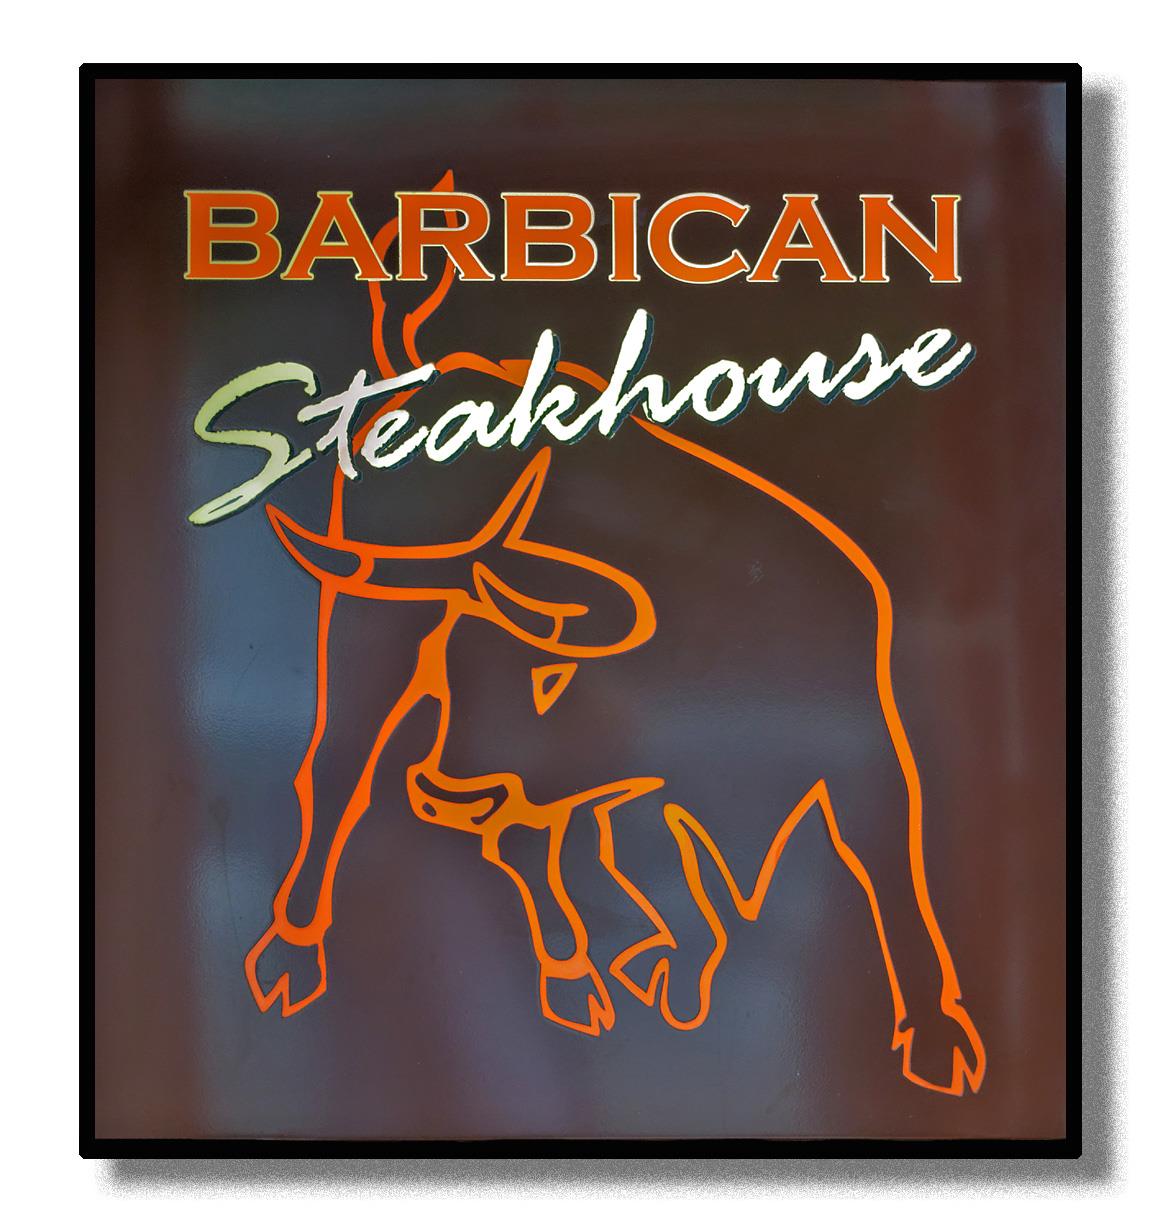 Steakhouse in Plymouth